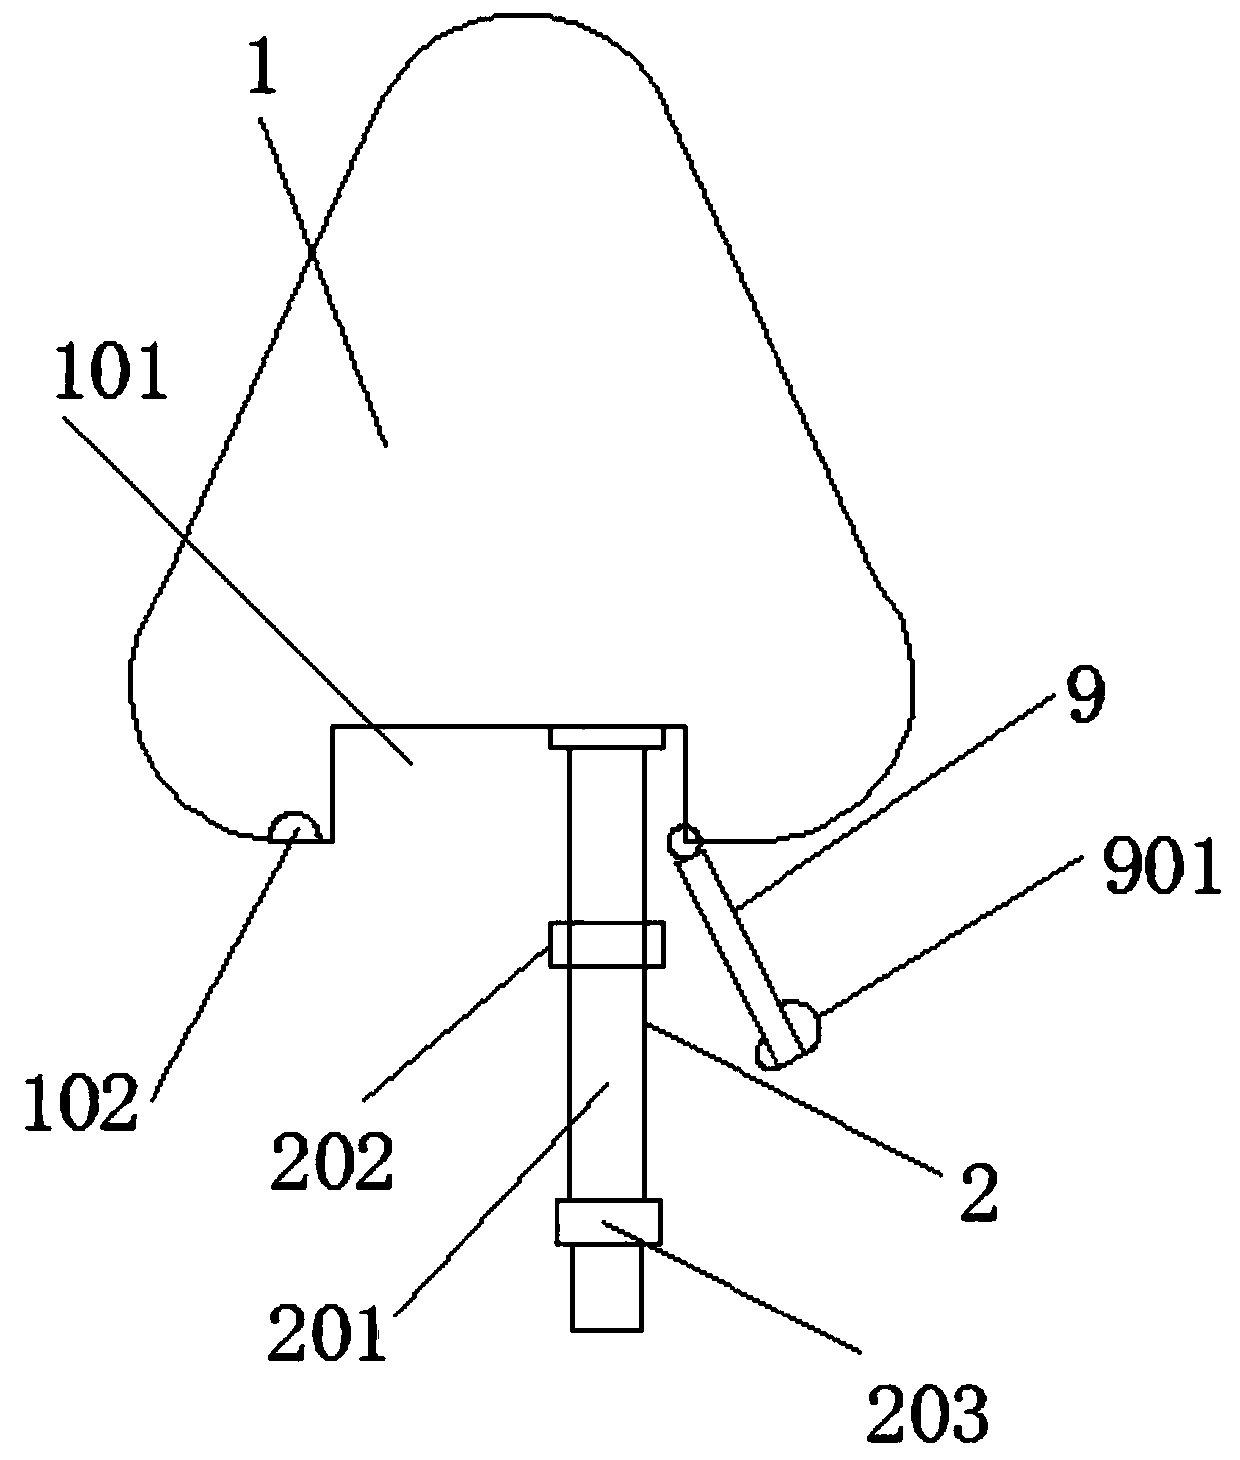 Perpendicularity measuring device for house construction